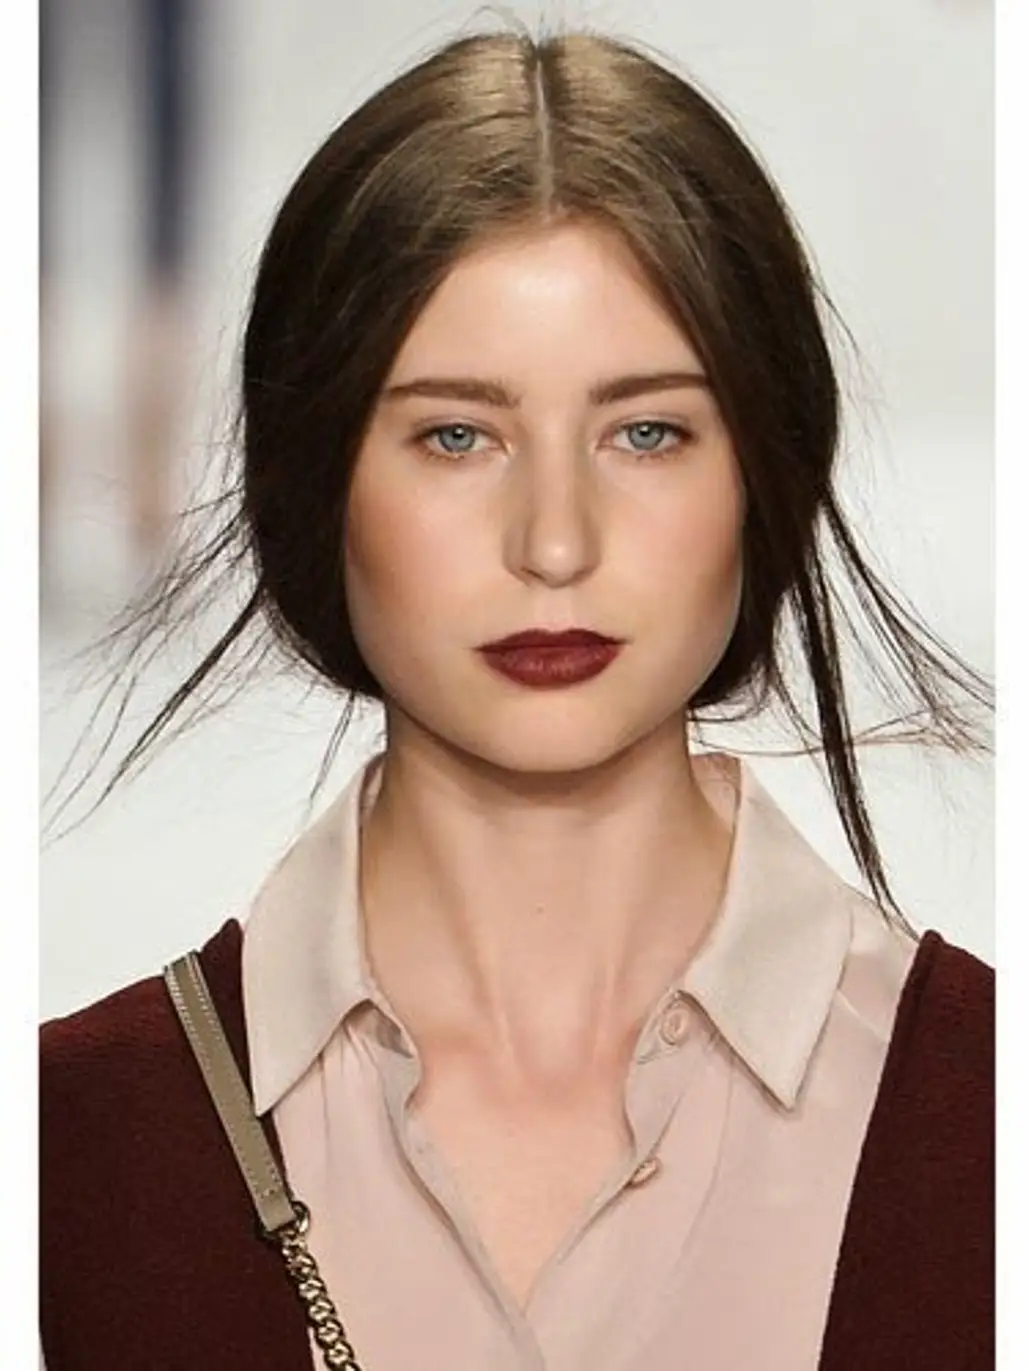 The Plum Pout (as Seen in Rebecca Minkoff’s Show)